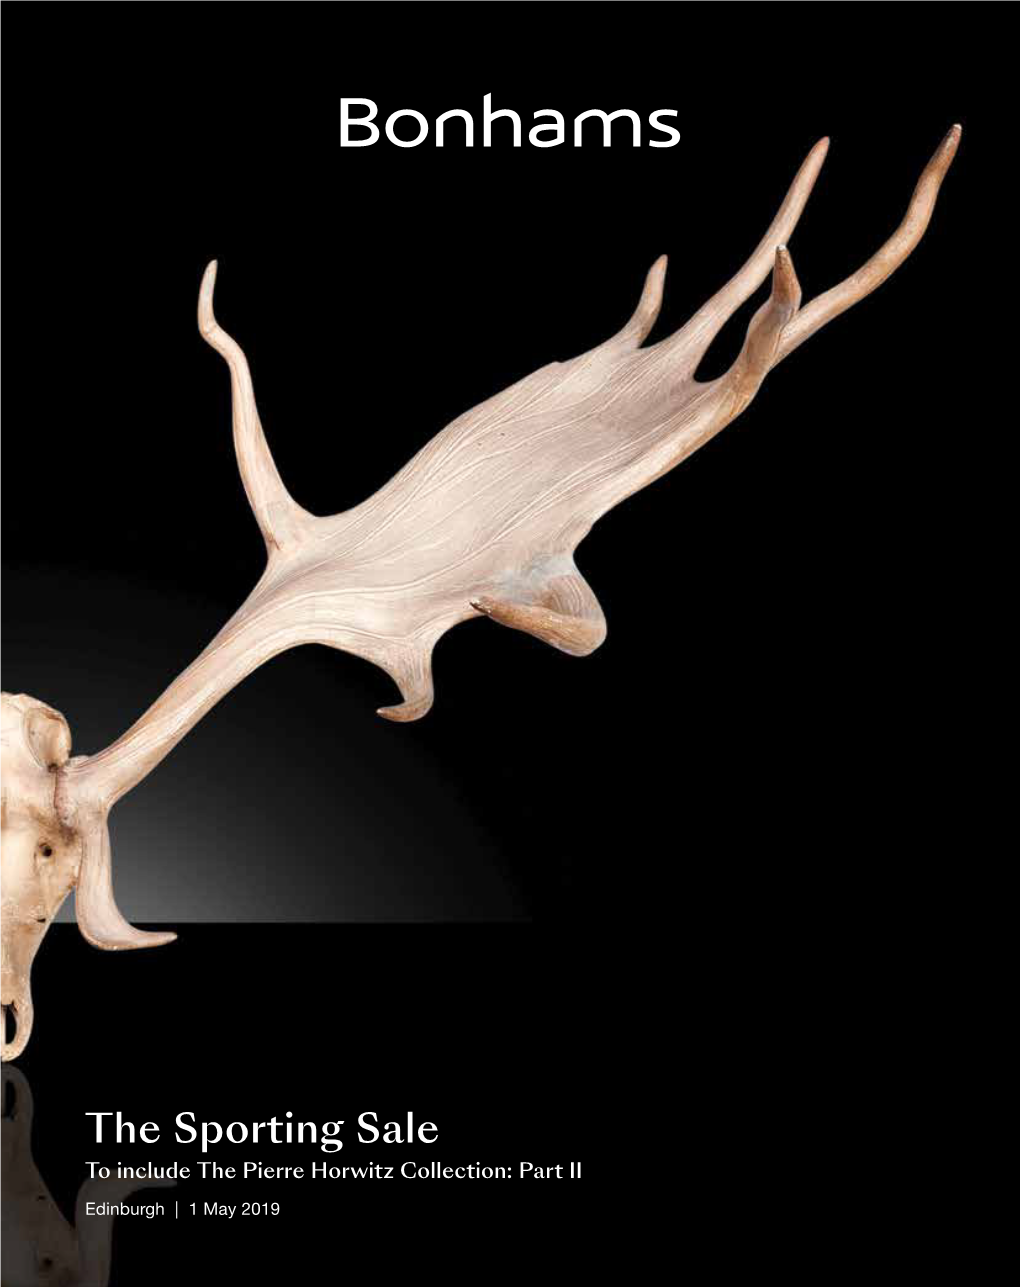 The Sporting Sale